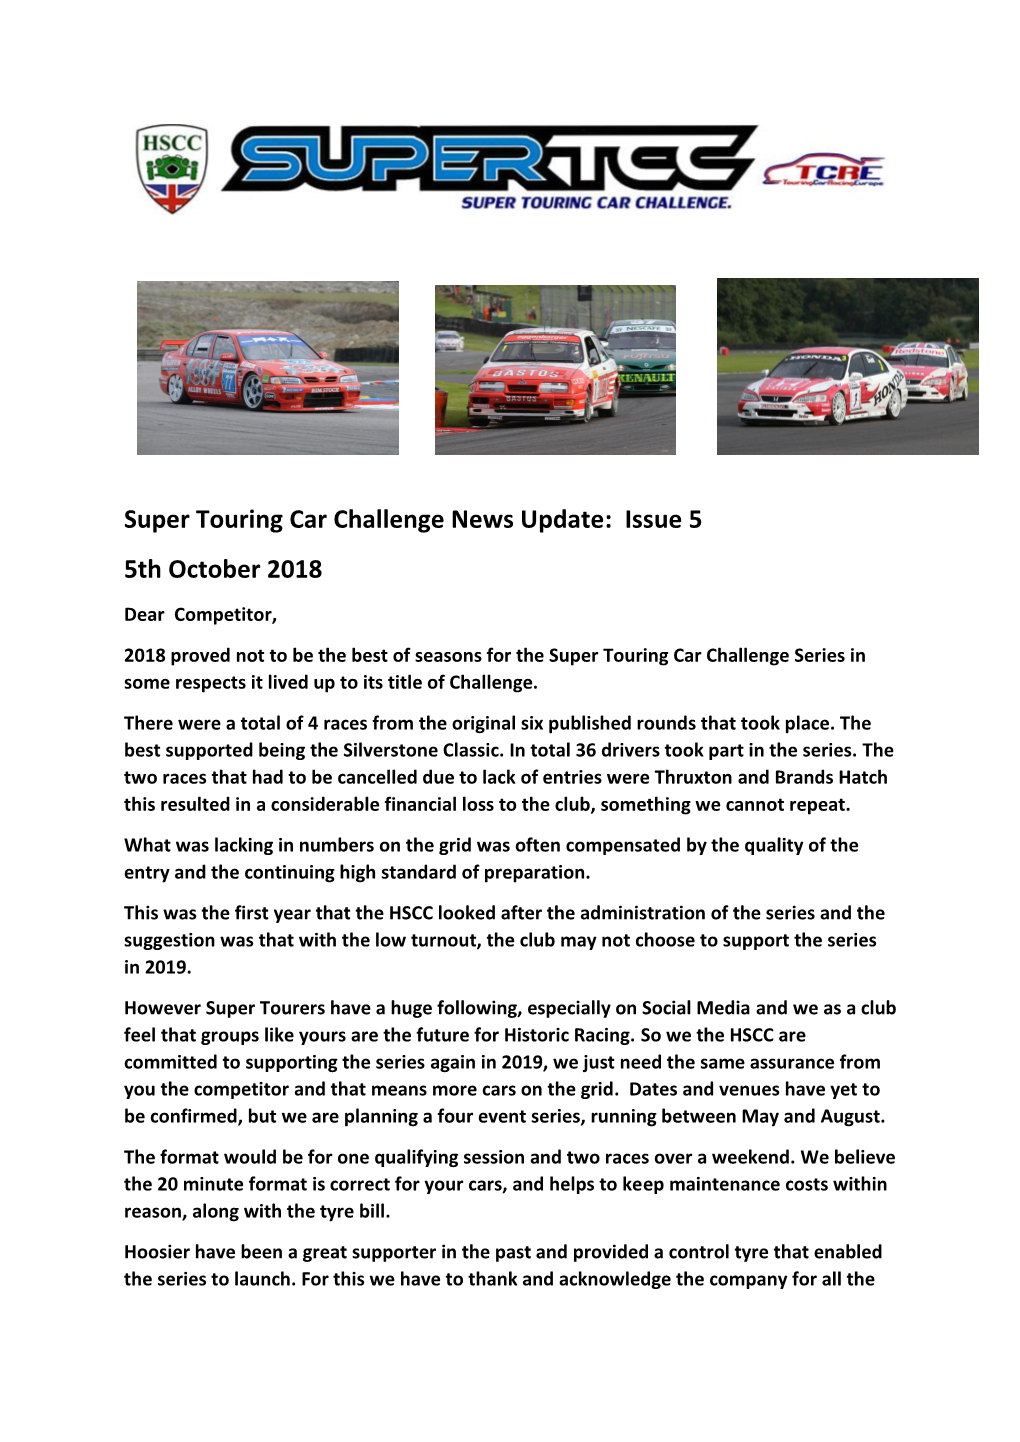 Super Touring Car Challenge News Update: Issue 5 5Th October 2018